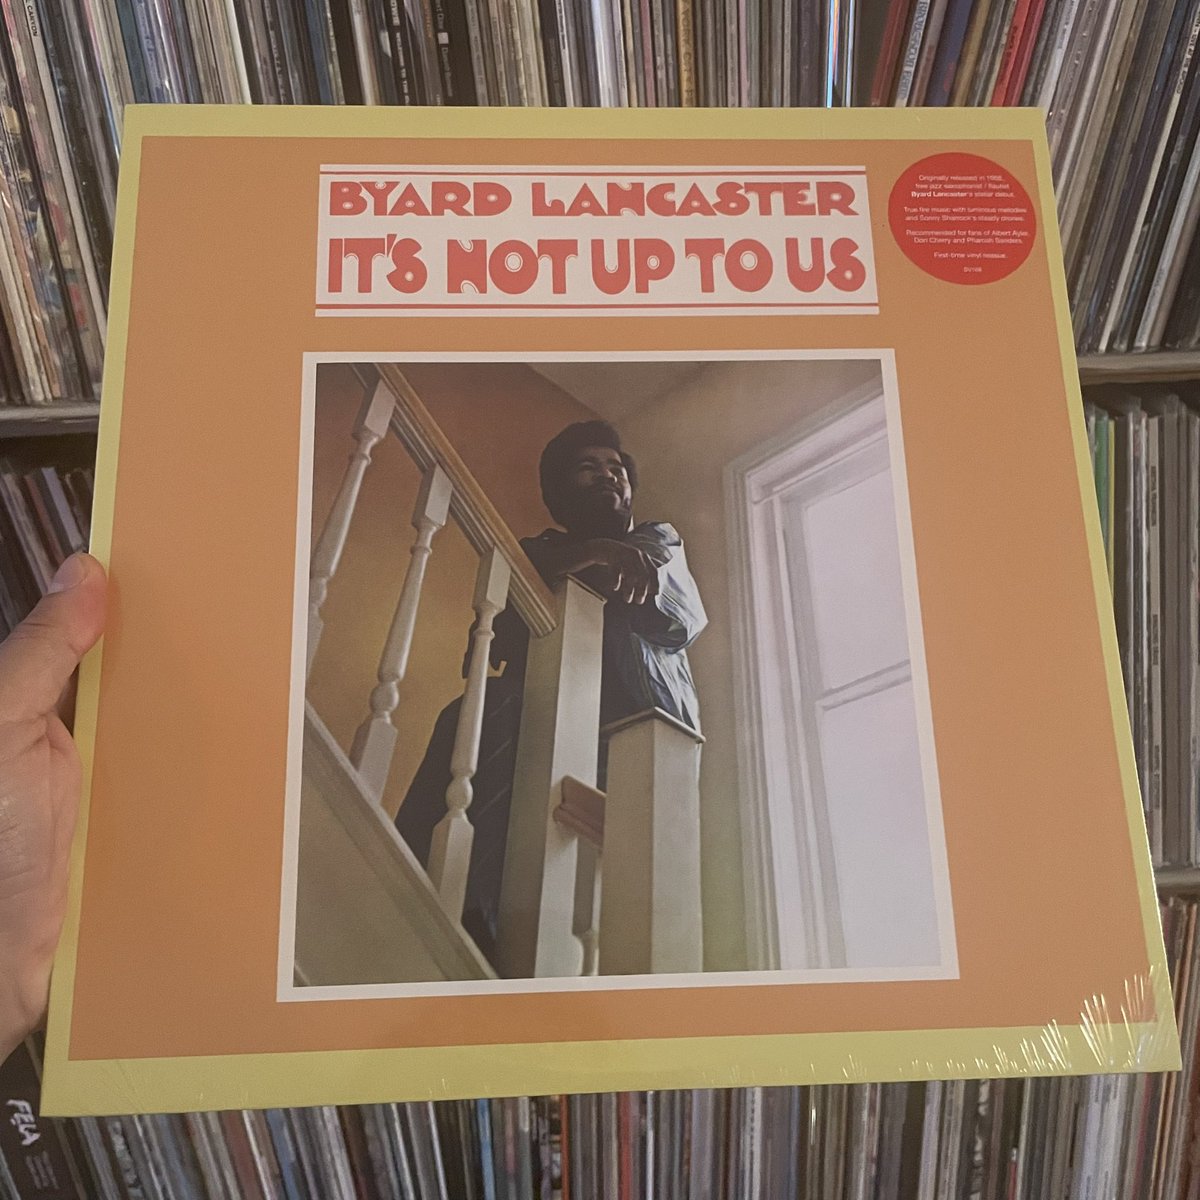 #NowPlaying Byard Lancaster - It's Not Up To Us (Superior Viaduct, 2023).

I've never seen the original released in 1968 on the Vortex label, an Atlantic subsidiary. So I picked up the Superior Viaduct recent reissue.

With #SonnySharrock on guitar.

#ByardLancaster